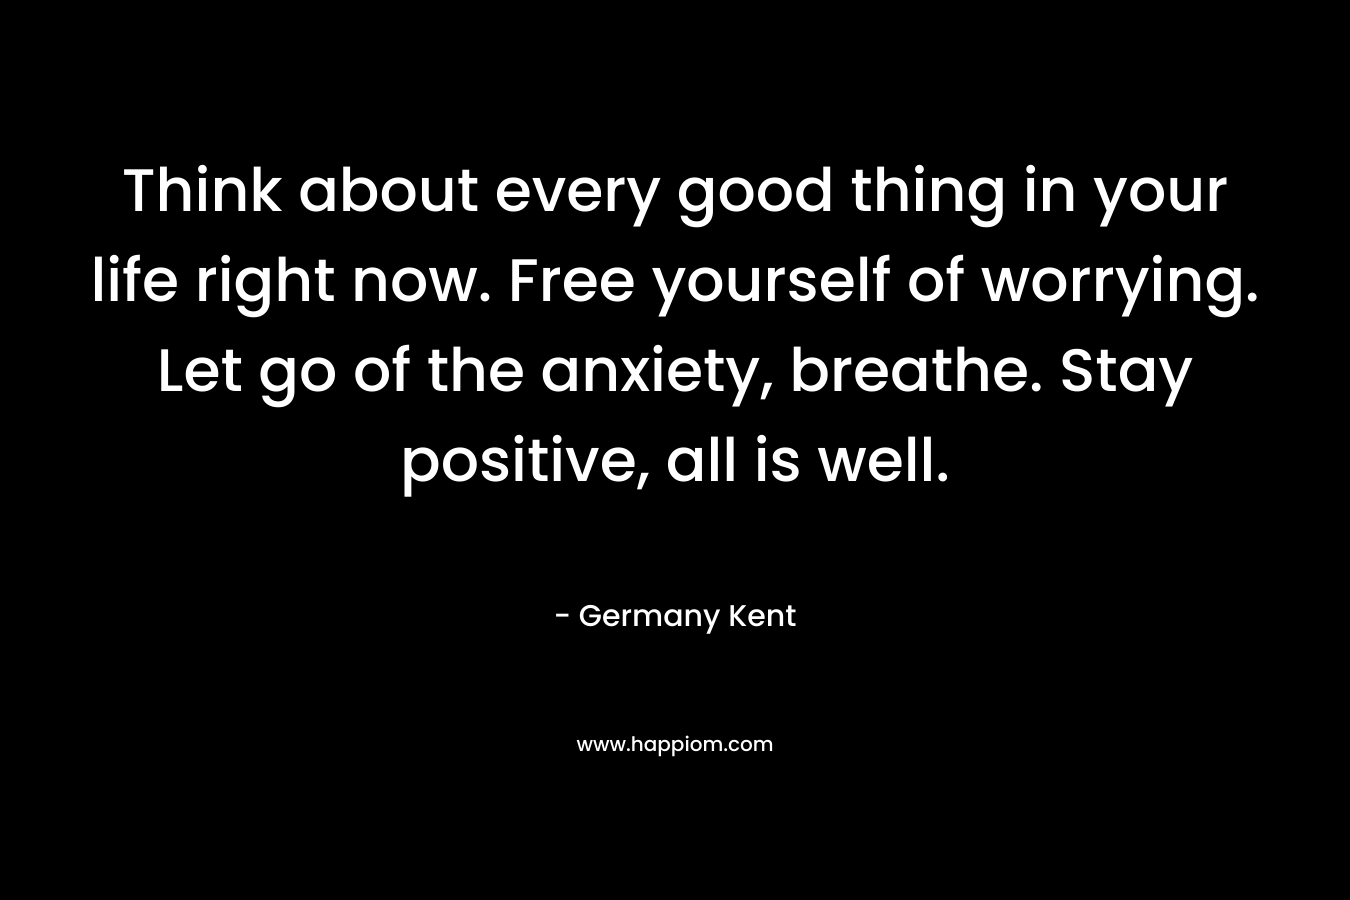 Think about every good thing in your life right now. Free yourself of worrying. Let go of the anxiety, breathe. Stay positive, all is well.